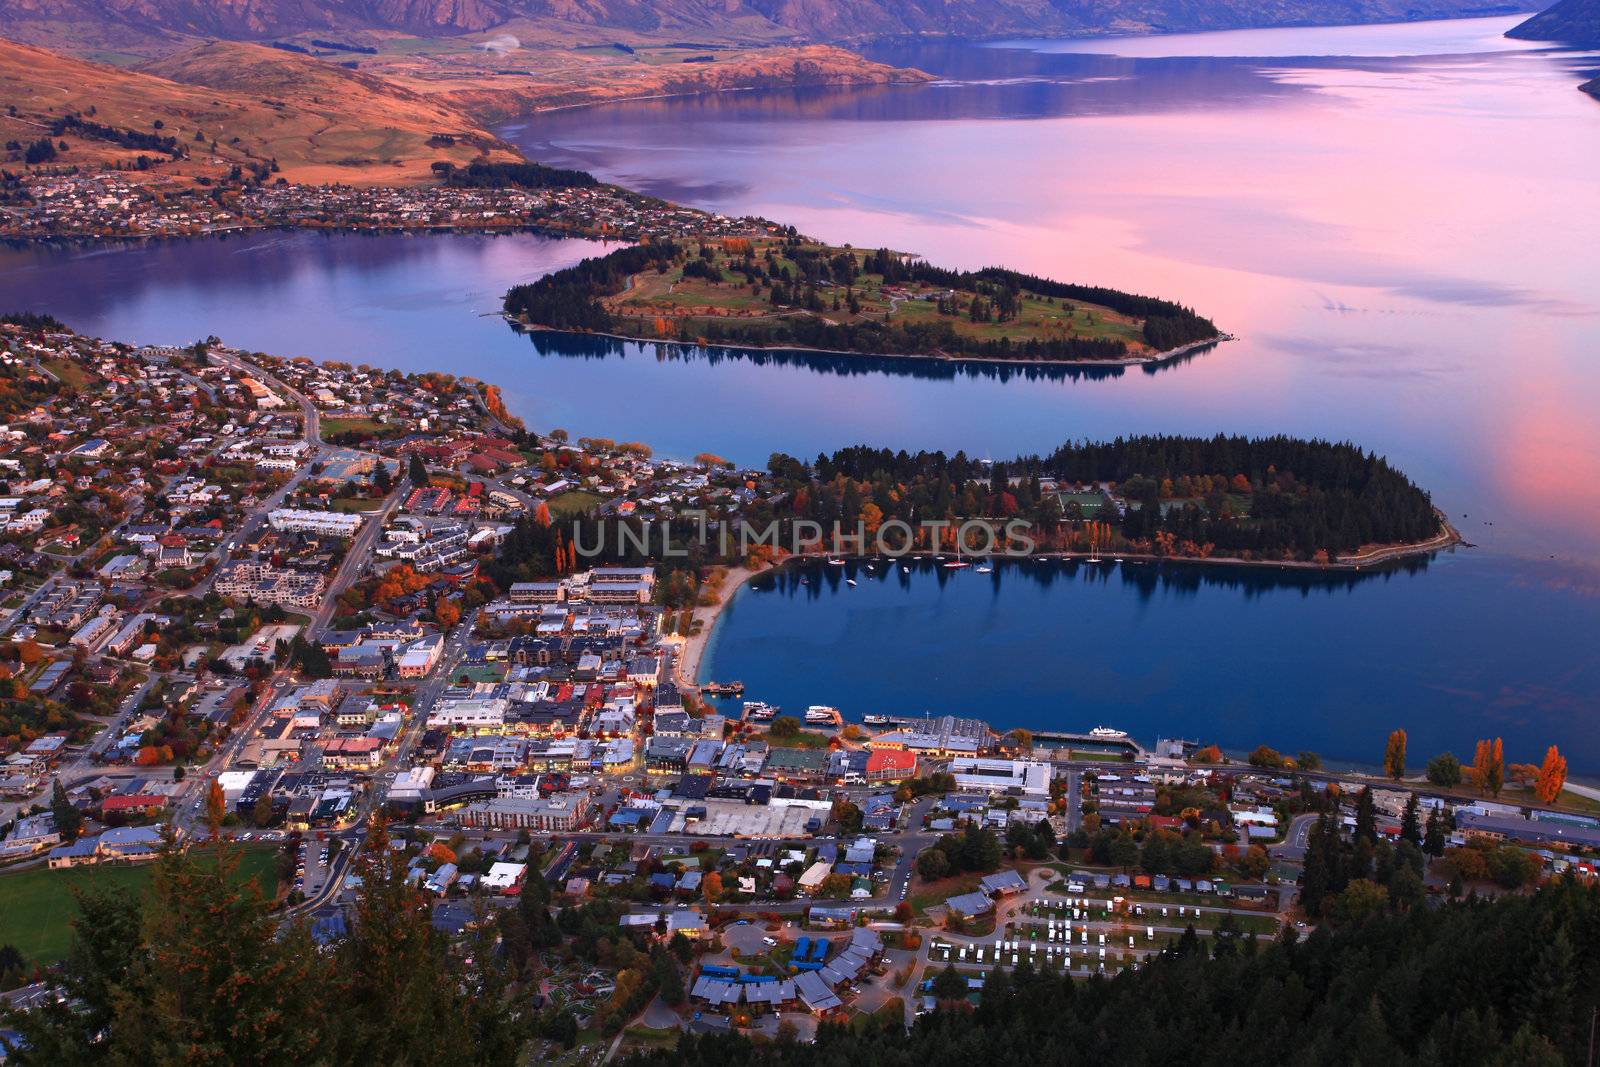 queenstown downtown skyline with lake Wakatipu from top at dusk